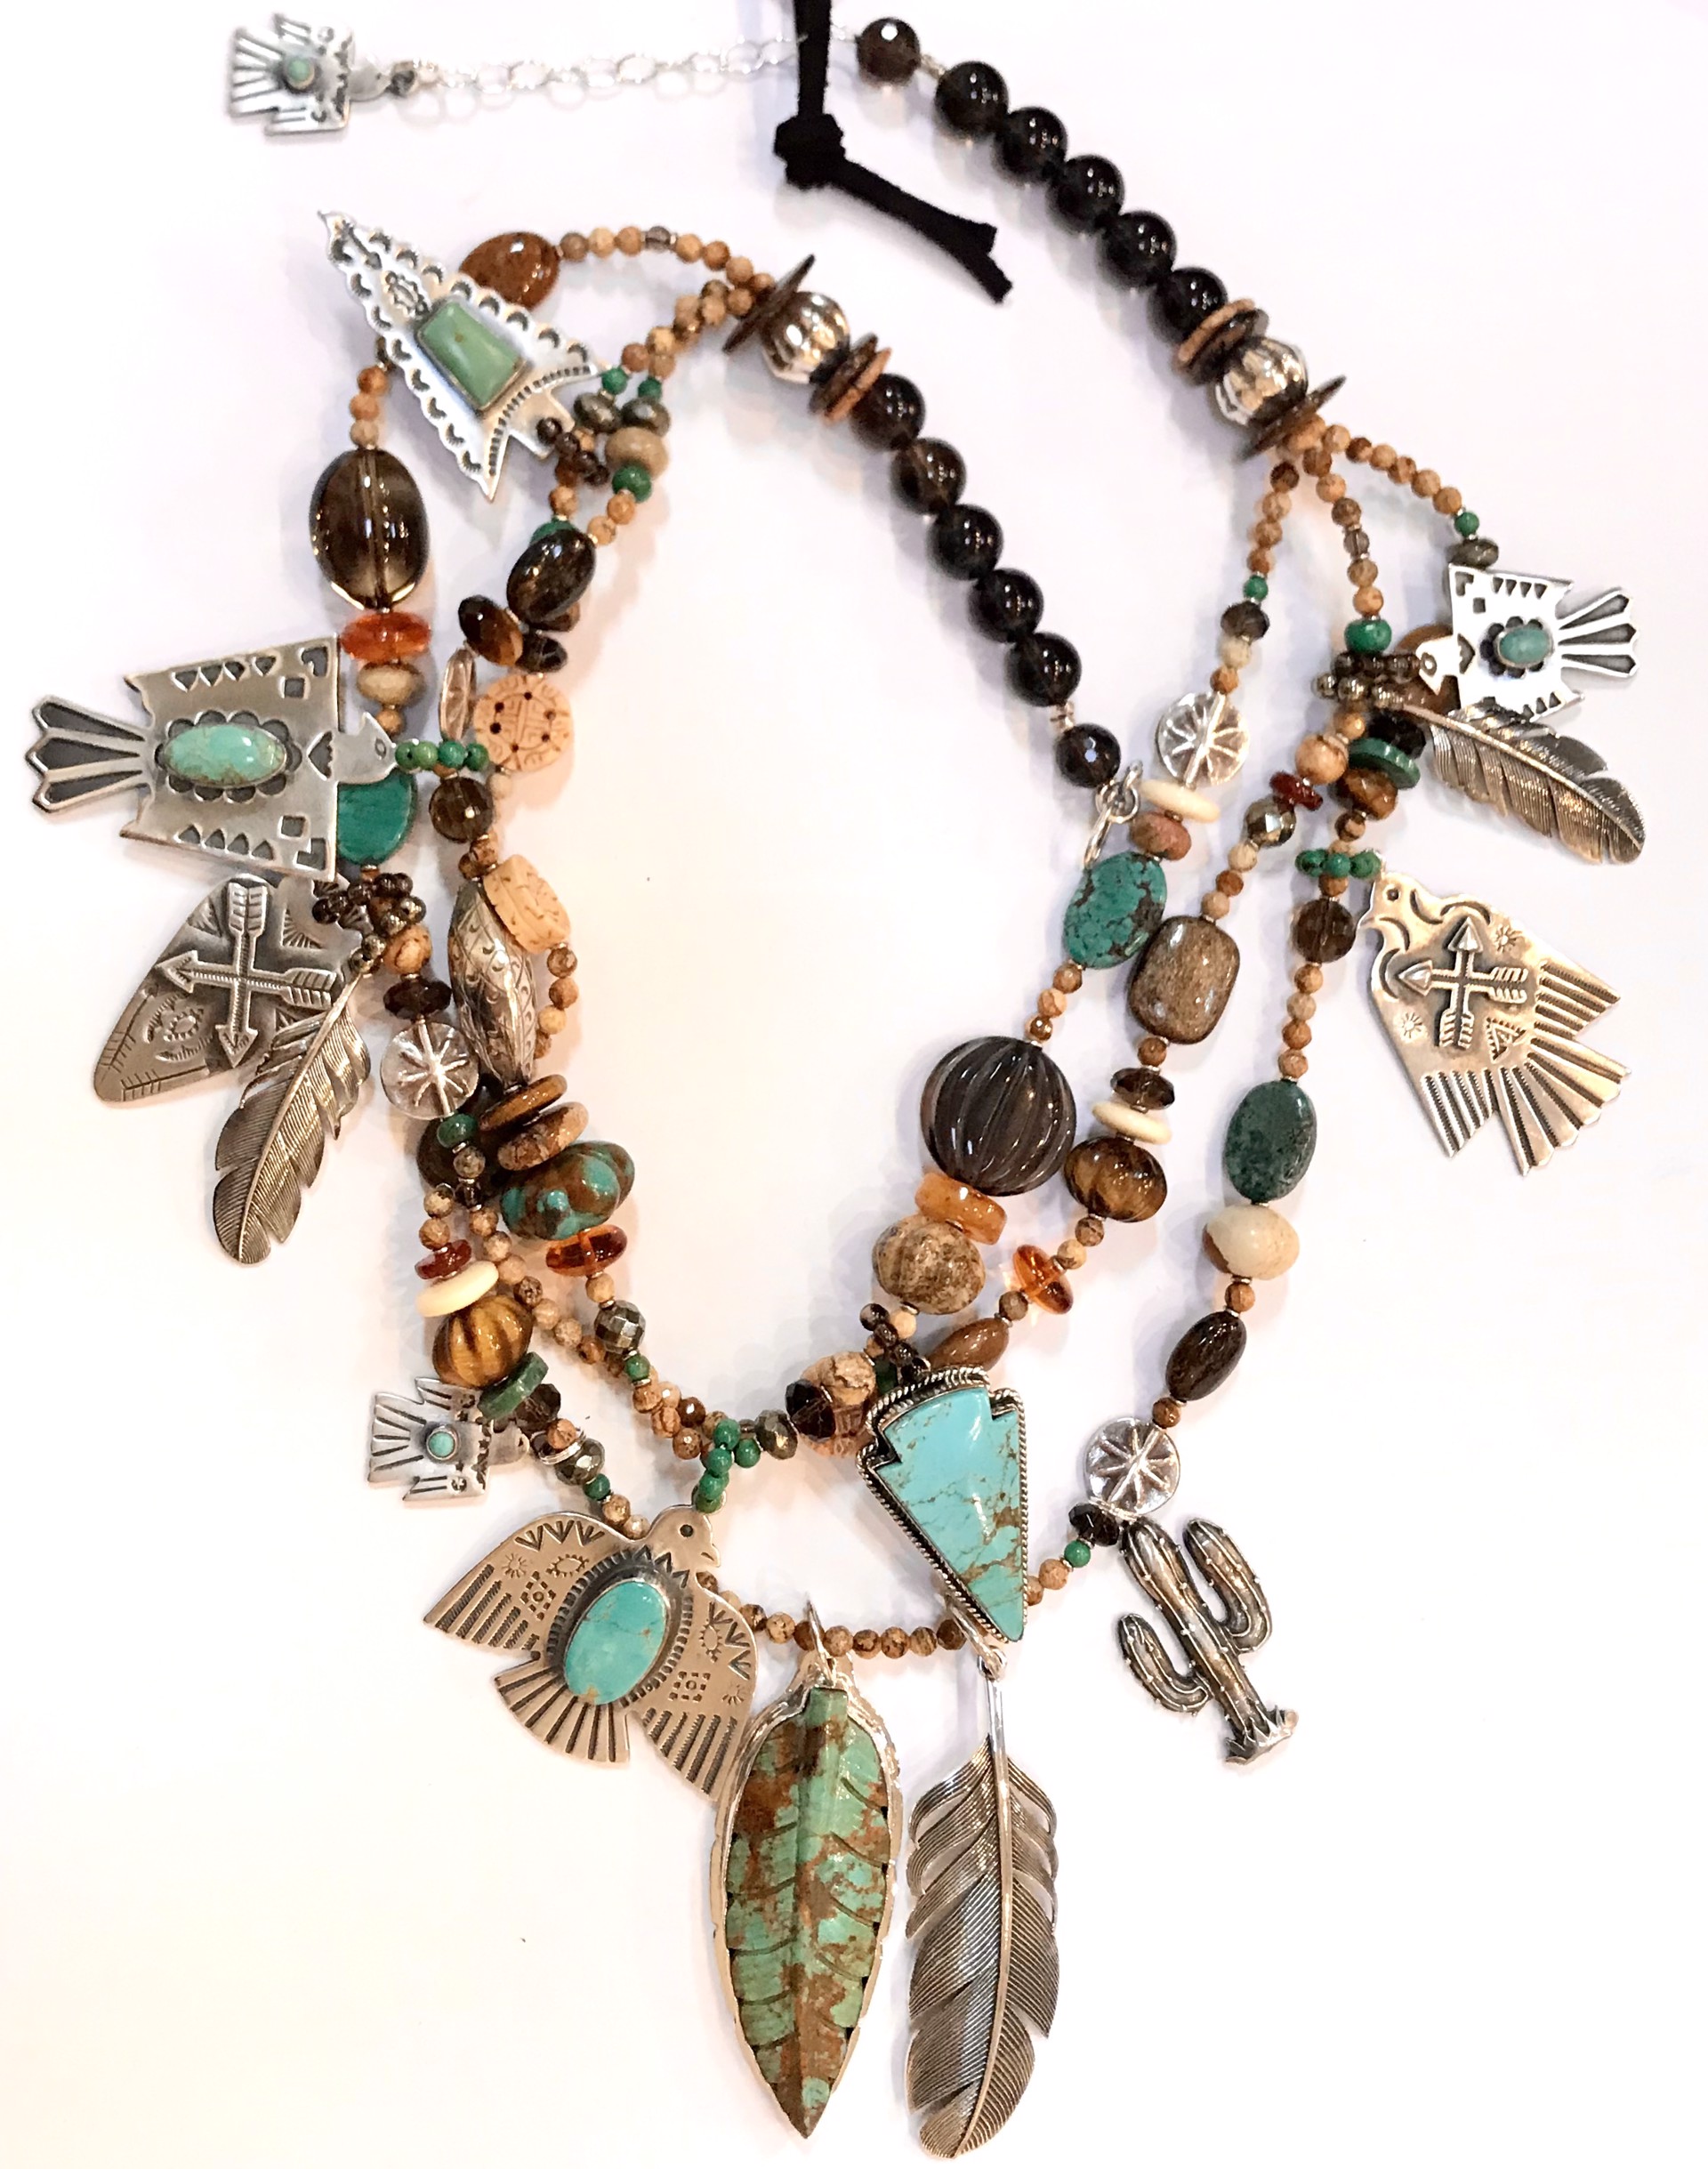 KY 1295 - 3 Strand Thunderbird Necklace With Picture Jasper, Turquoise,Smoky Quartz with Sterling Silver by Kim Yubeta